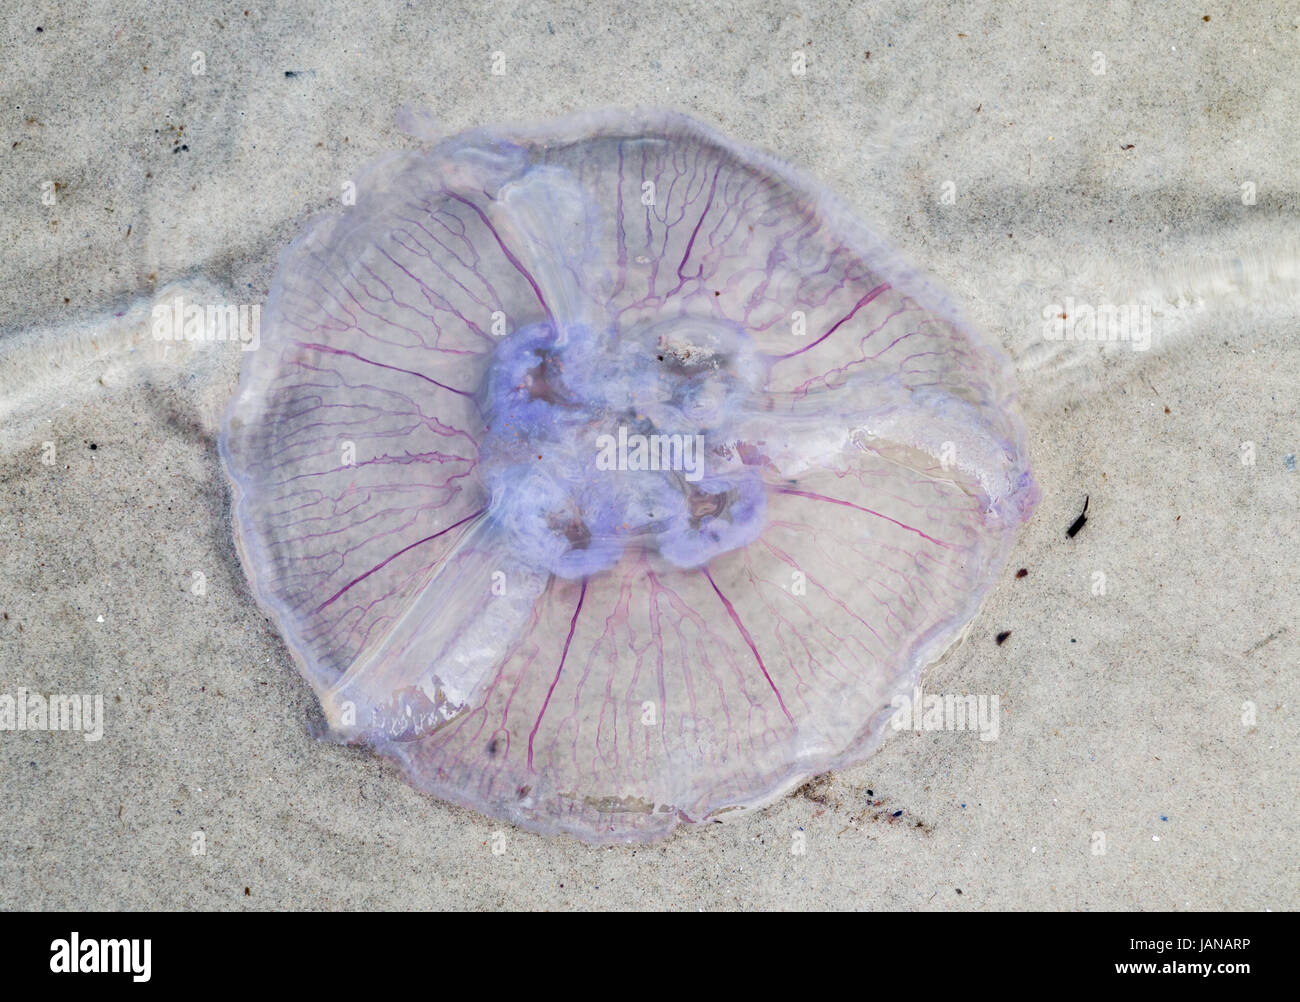 jellyfish in the sand Stock Photo